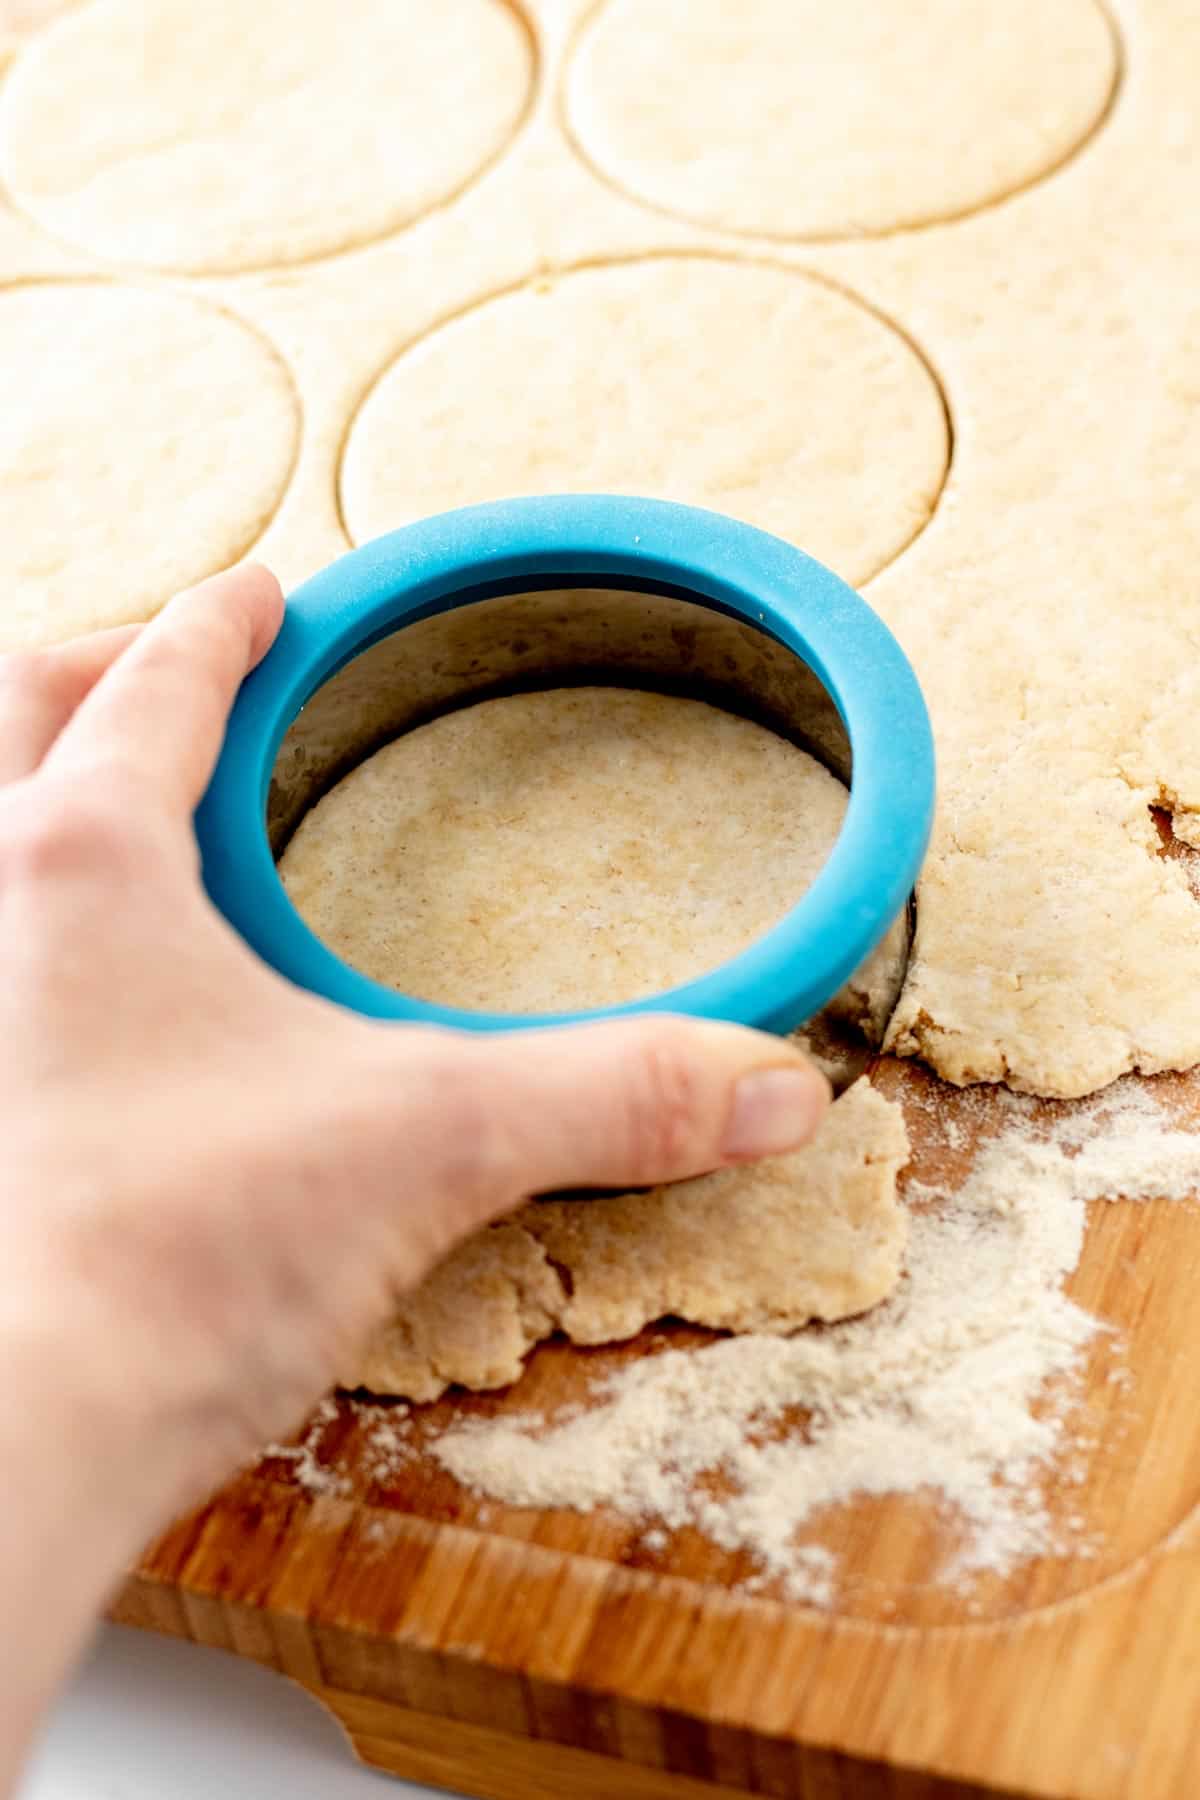 A hand pressing a circular cookie cutter into homemade pizza dough to make mini pizzas.